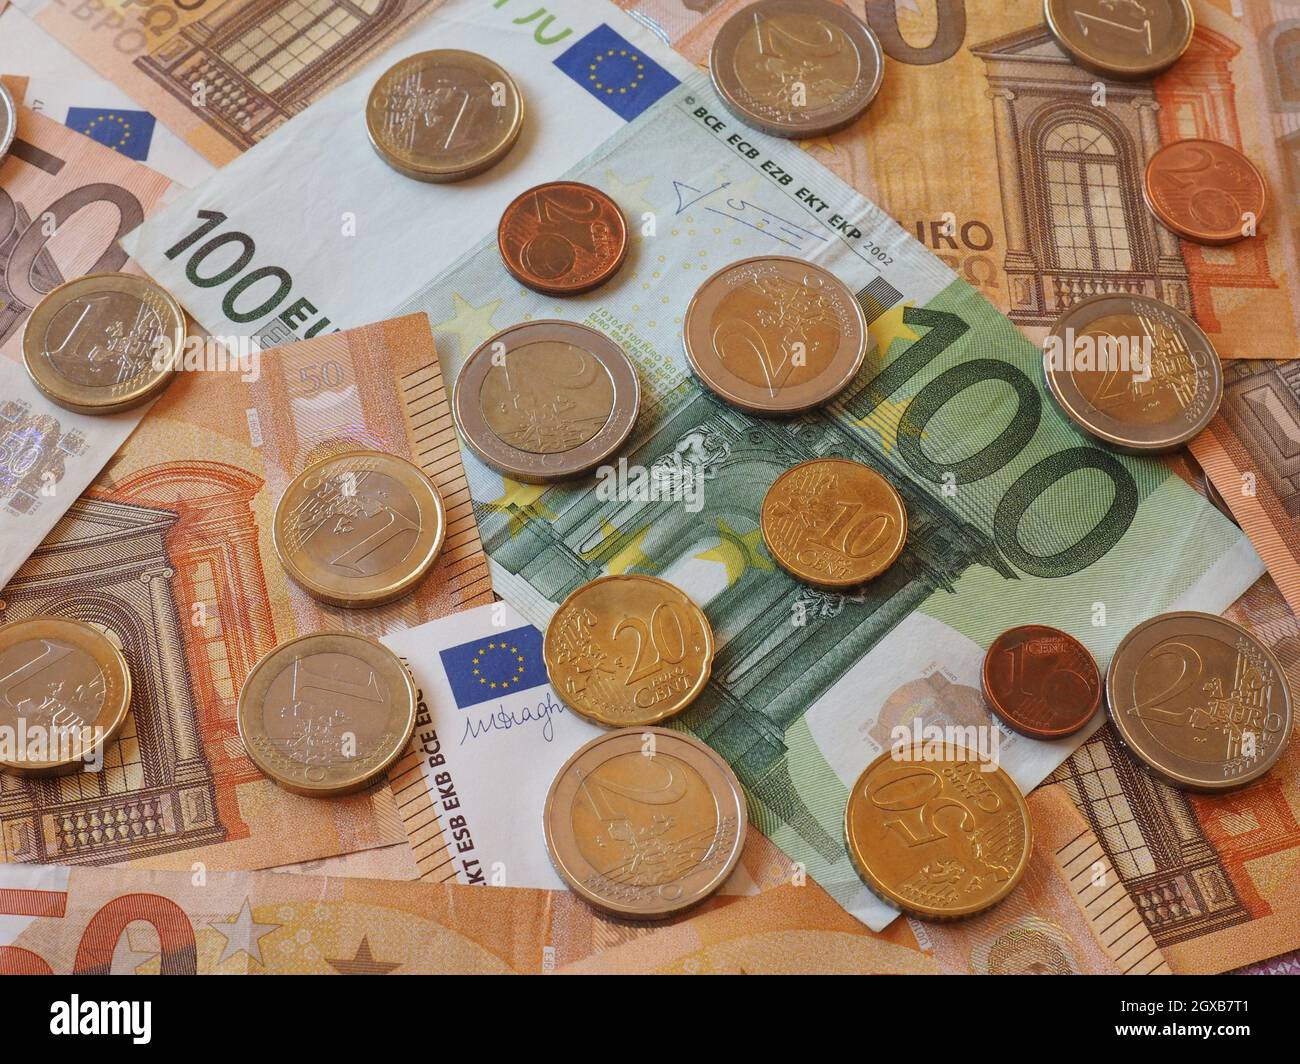 Euro banknotes and coins (EUR), currency of European Union. Stock Photo